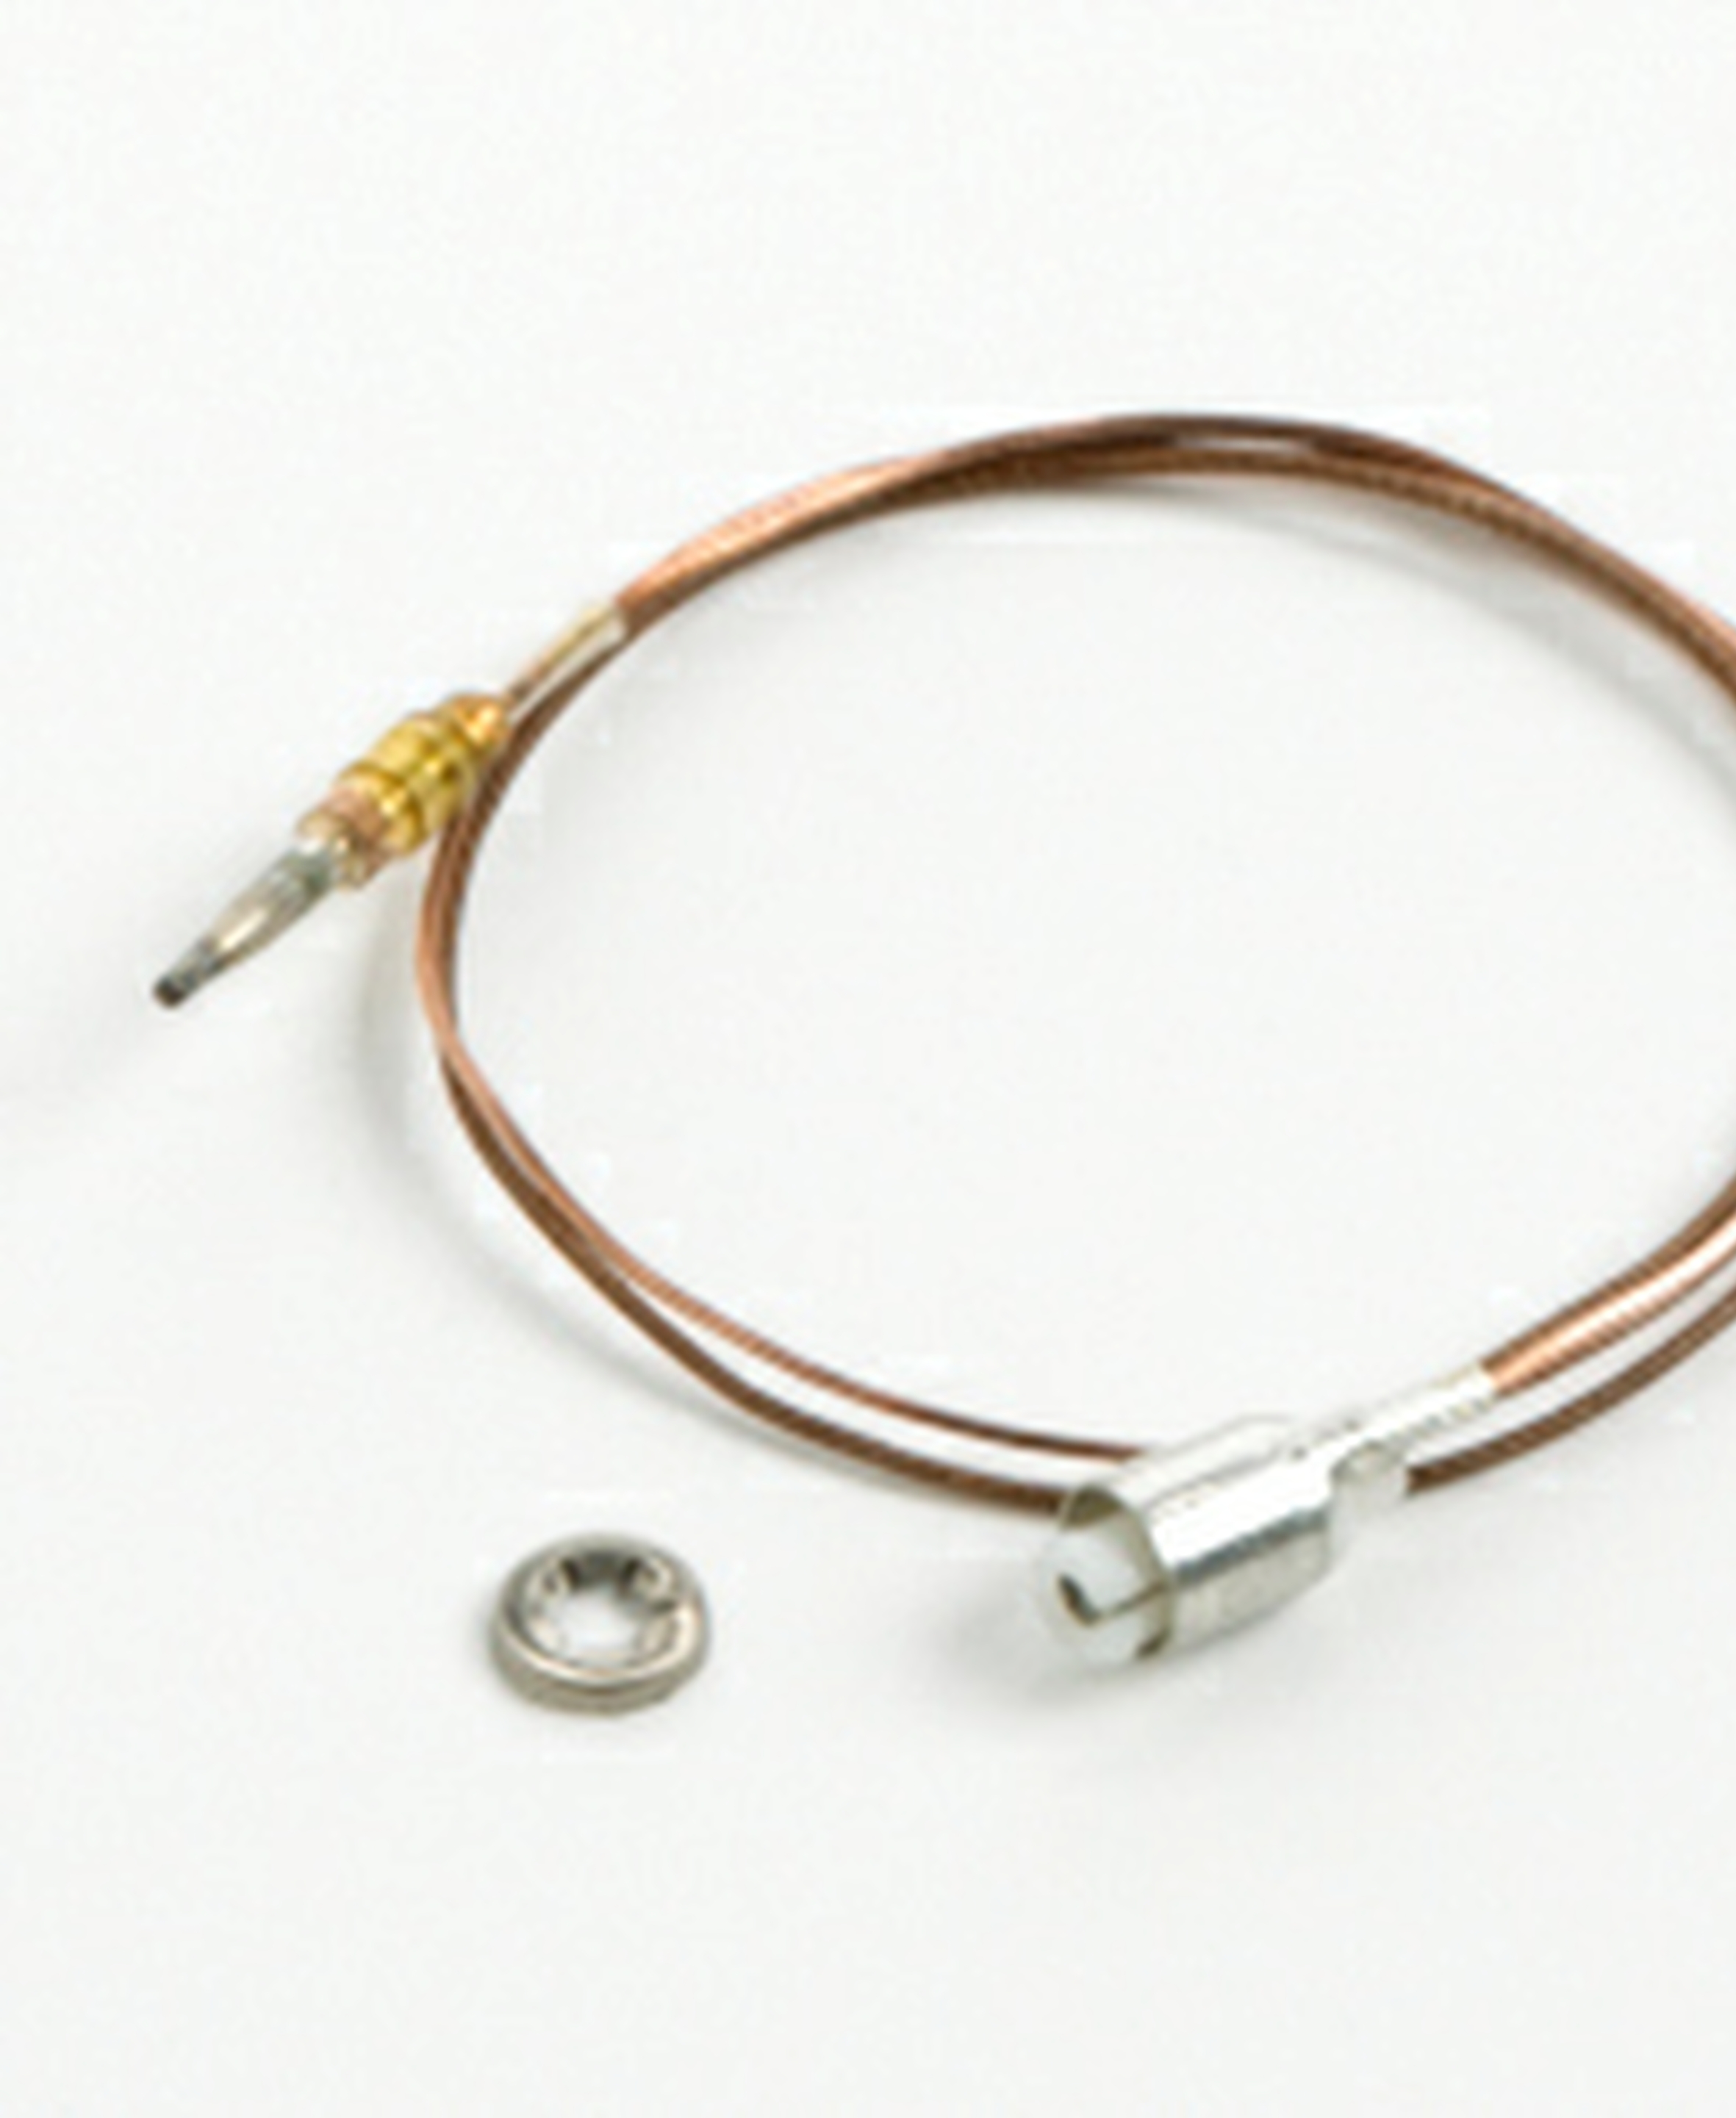 Dometic Cooker Thermocouples